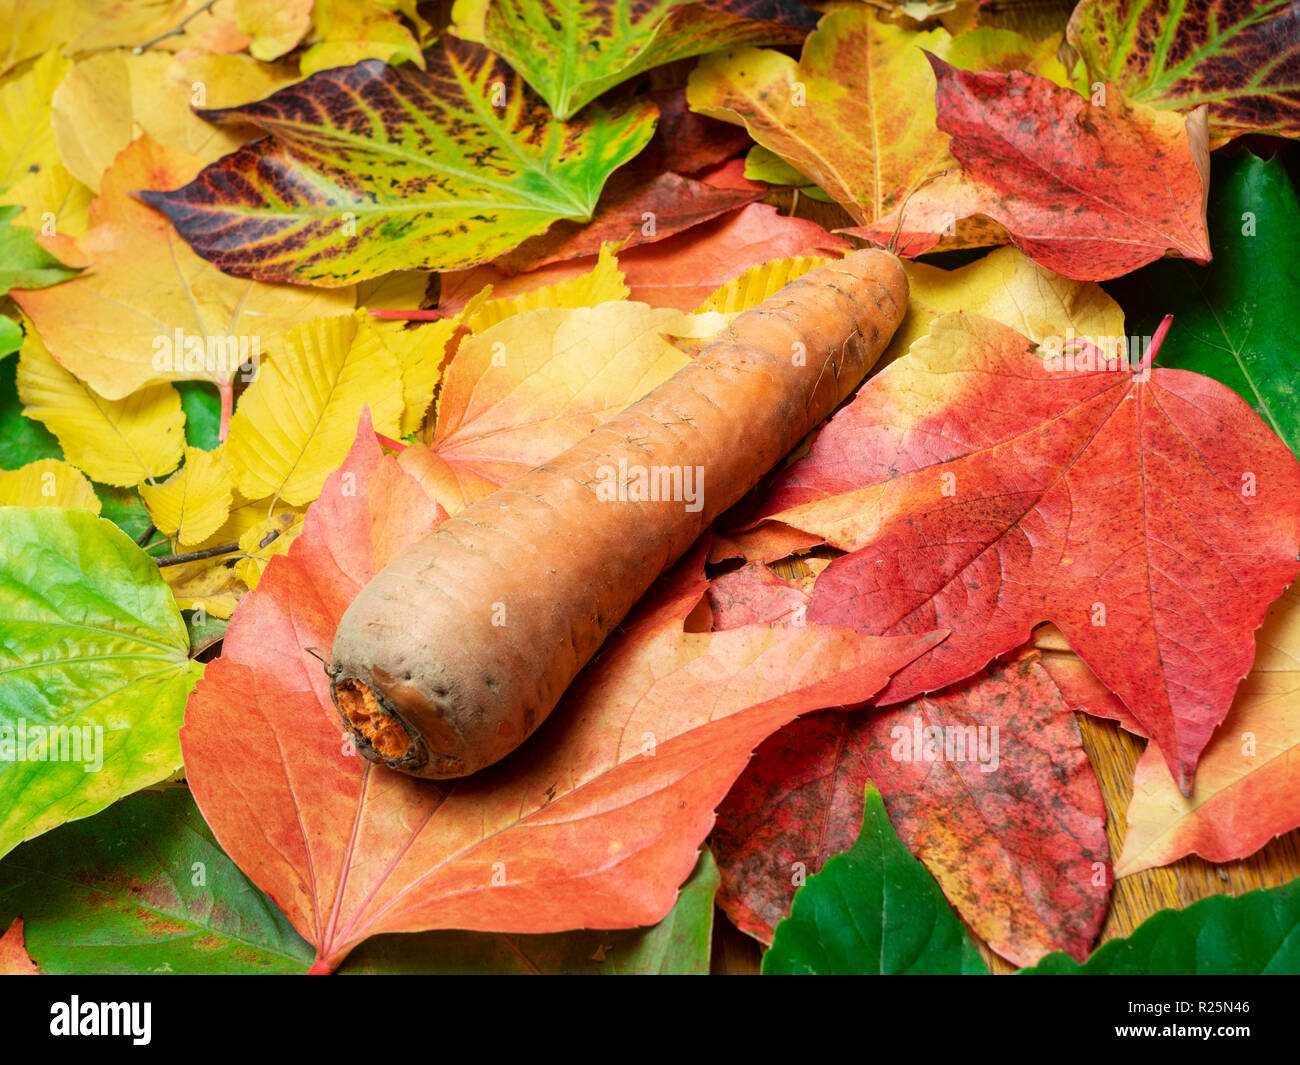 Carrot (seasonal vegetable) is placed on autumn leaves in green, red, orange and yellow colours. Close-up. Stock Photo